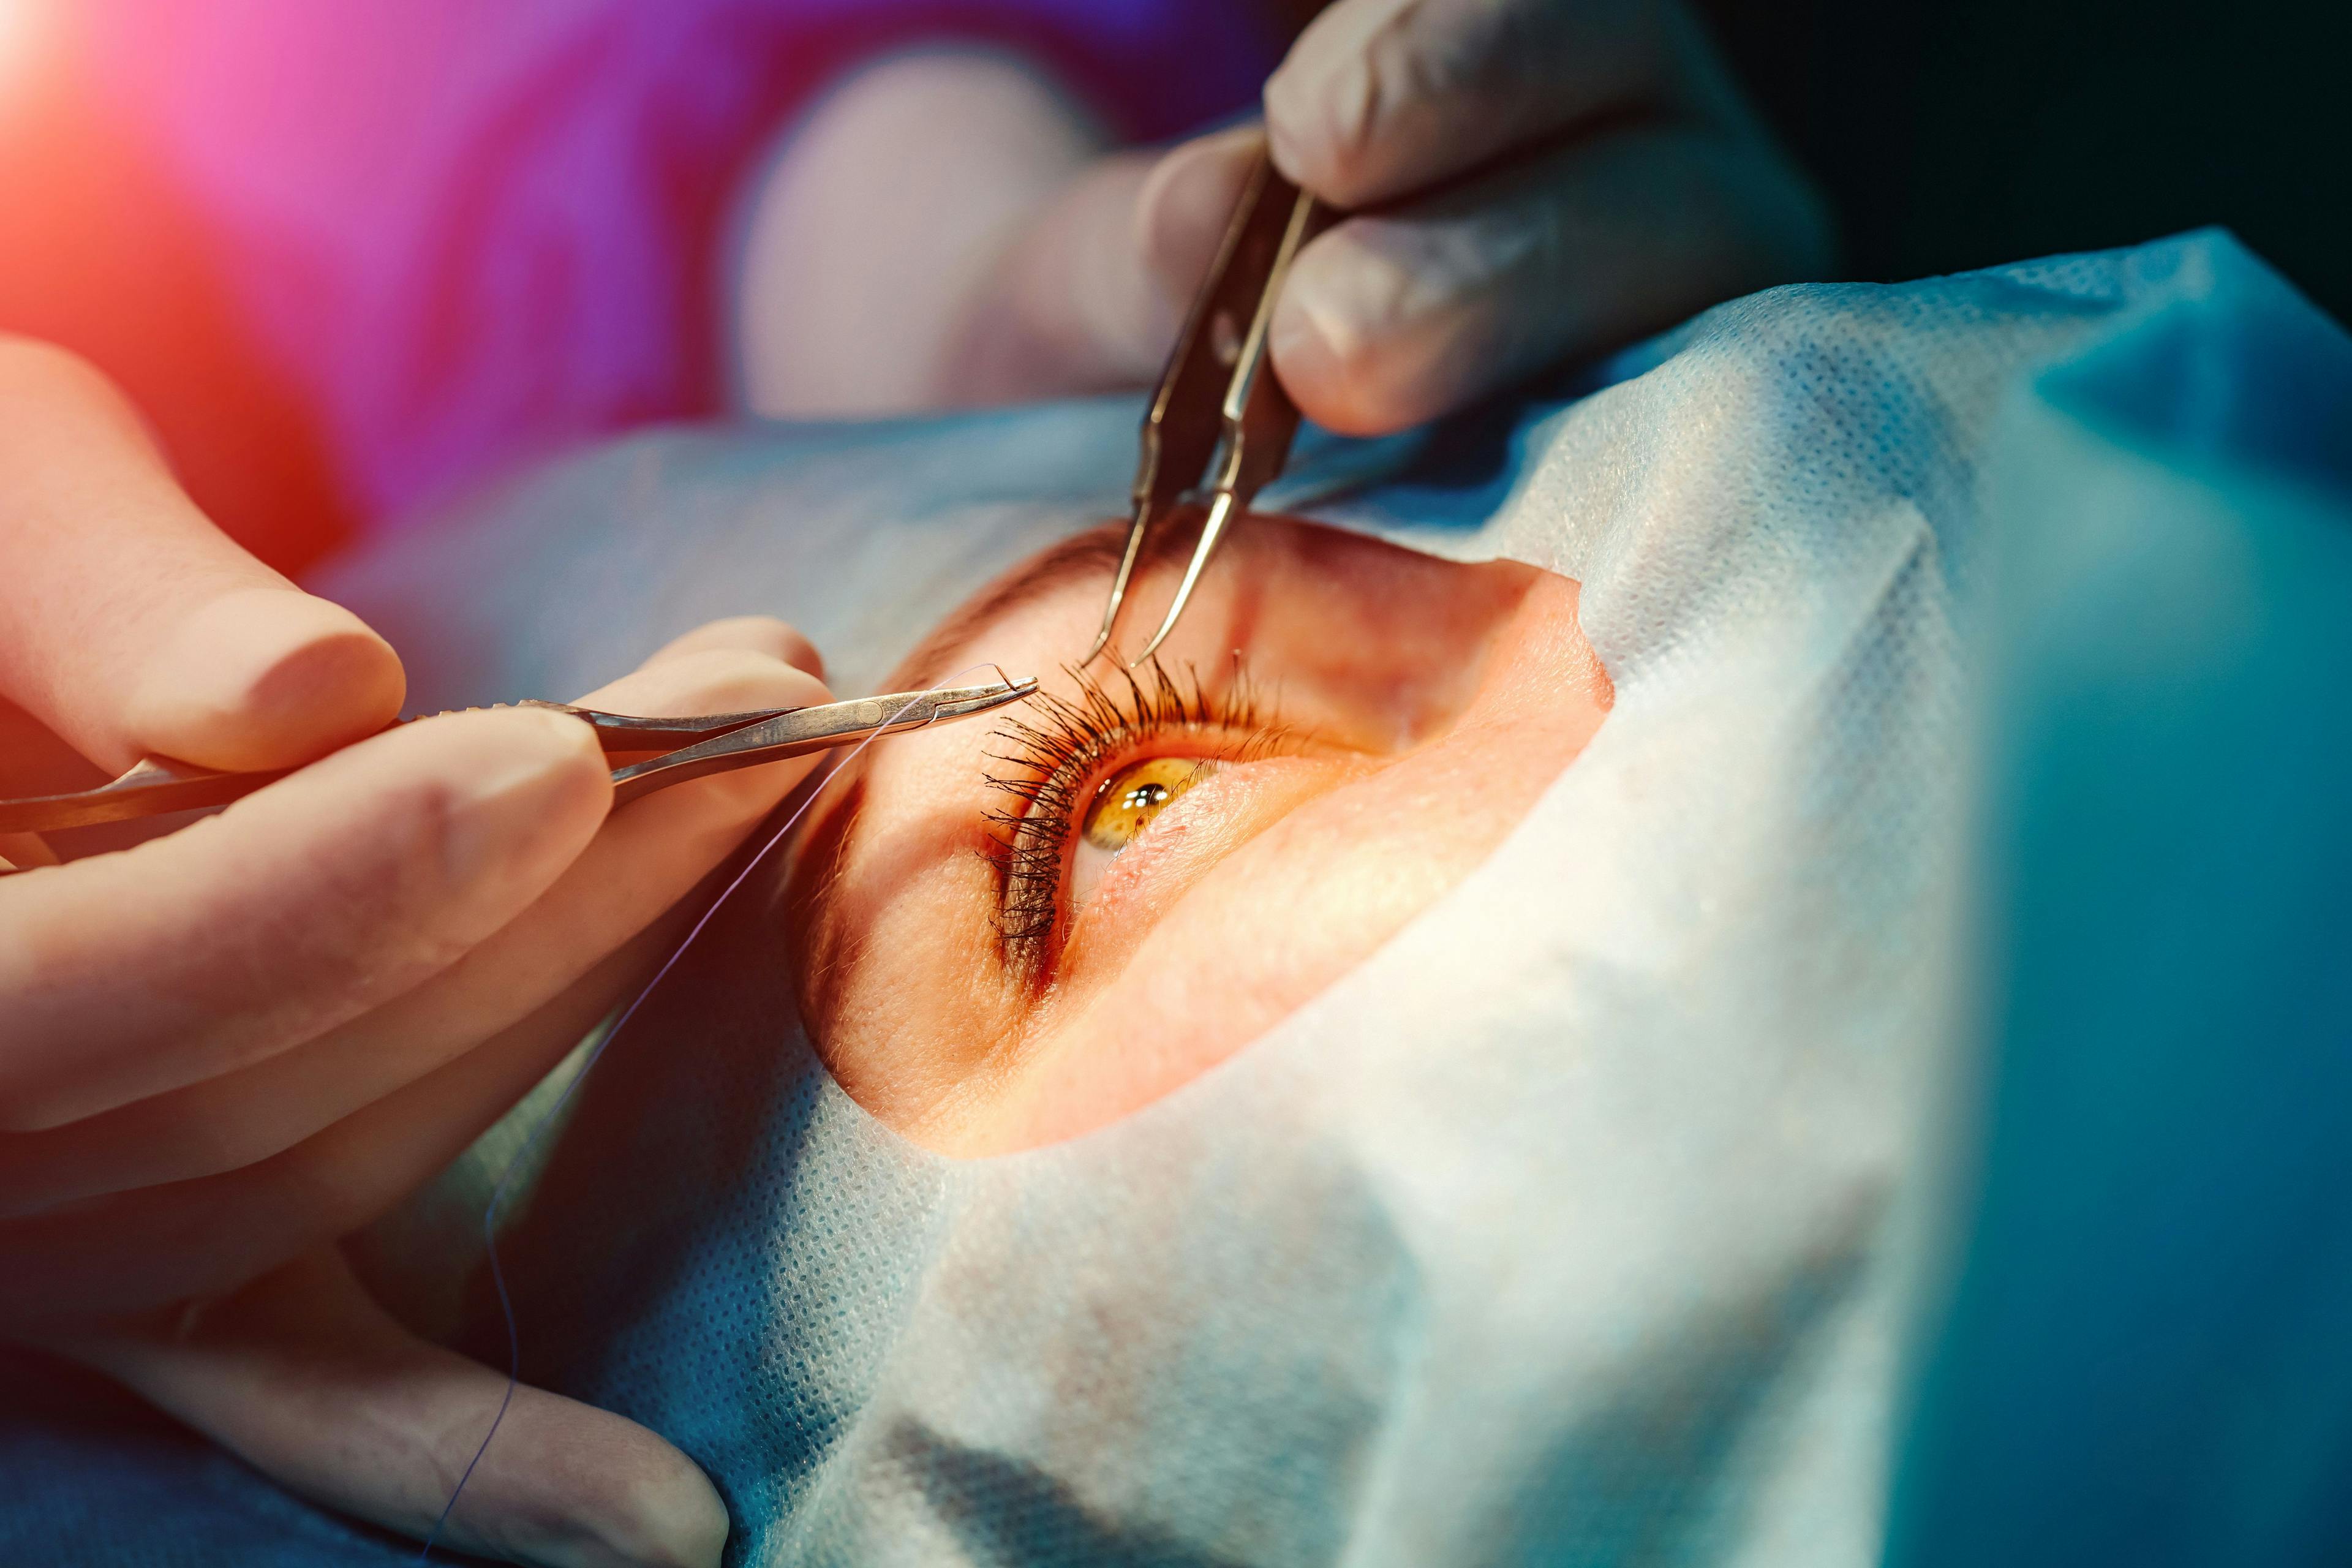 This study, performed in an environment with universal health care, reveals that race and ethnicity may impact both the presentation and outcomes of retinal detachment surgery.